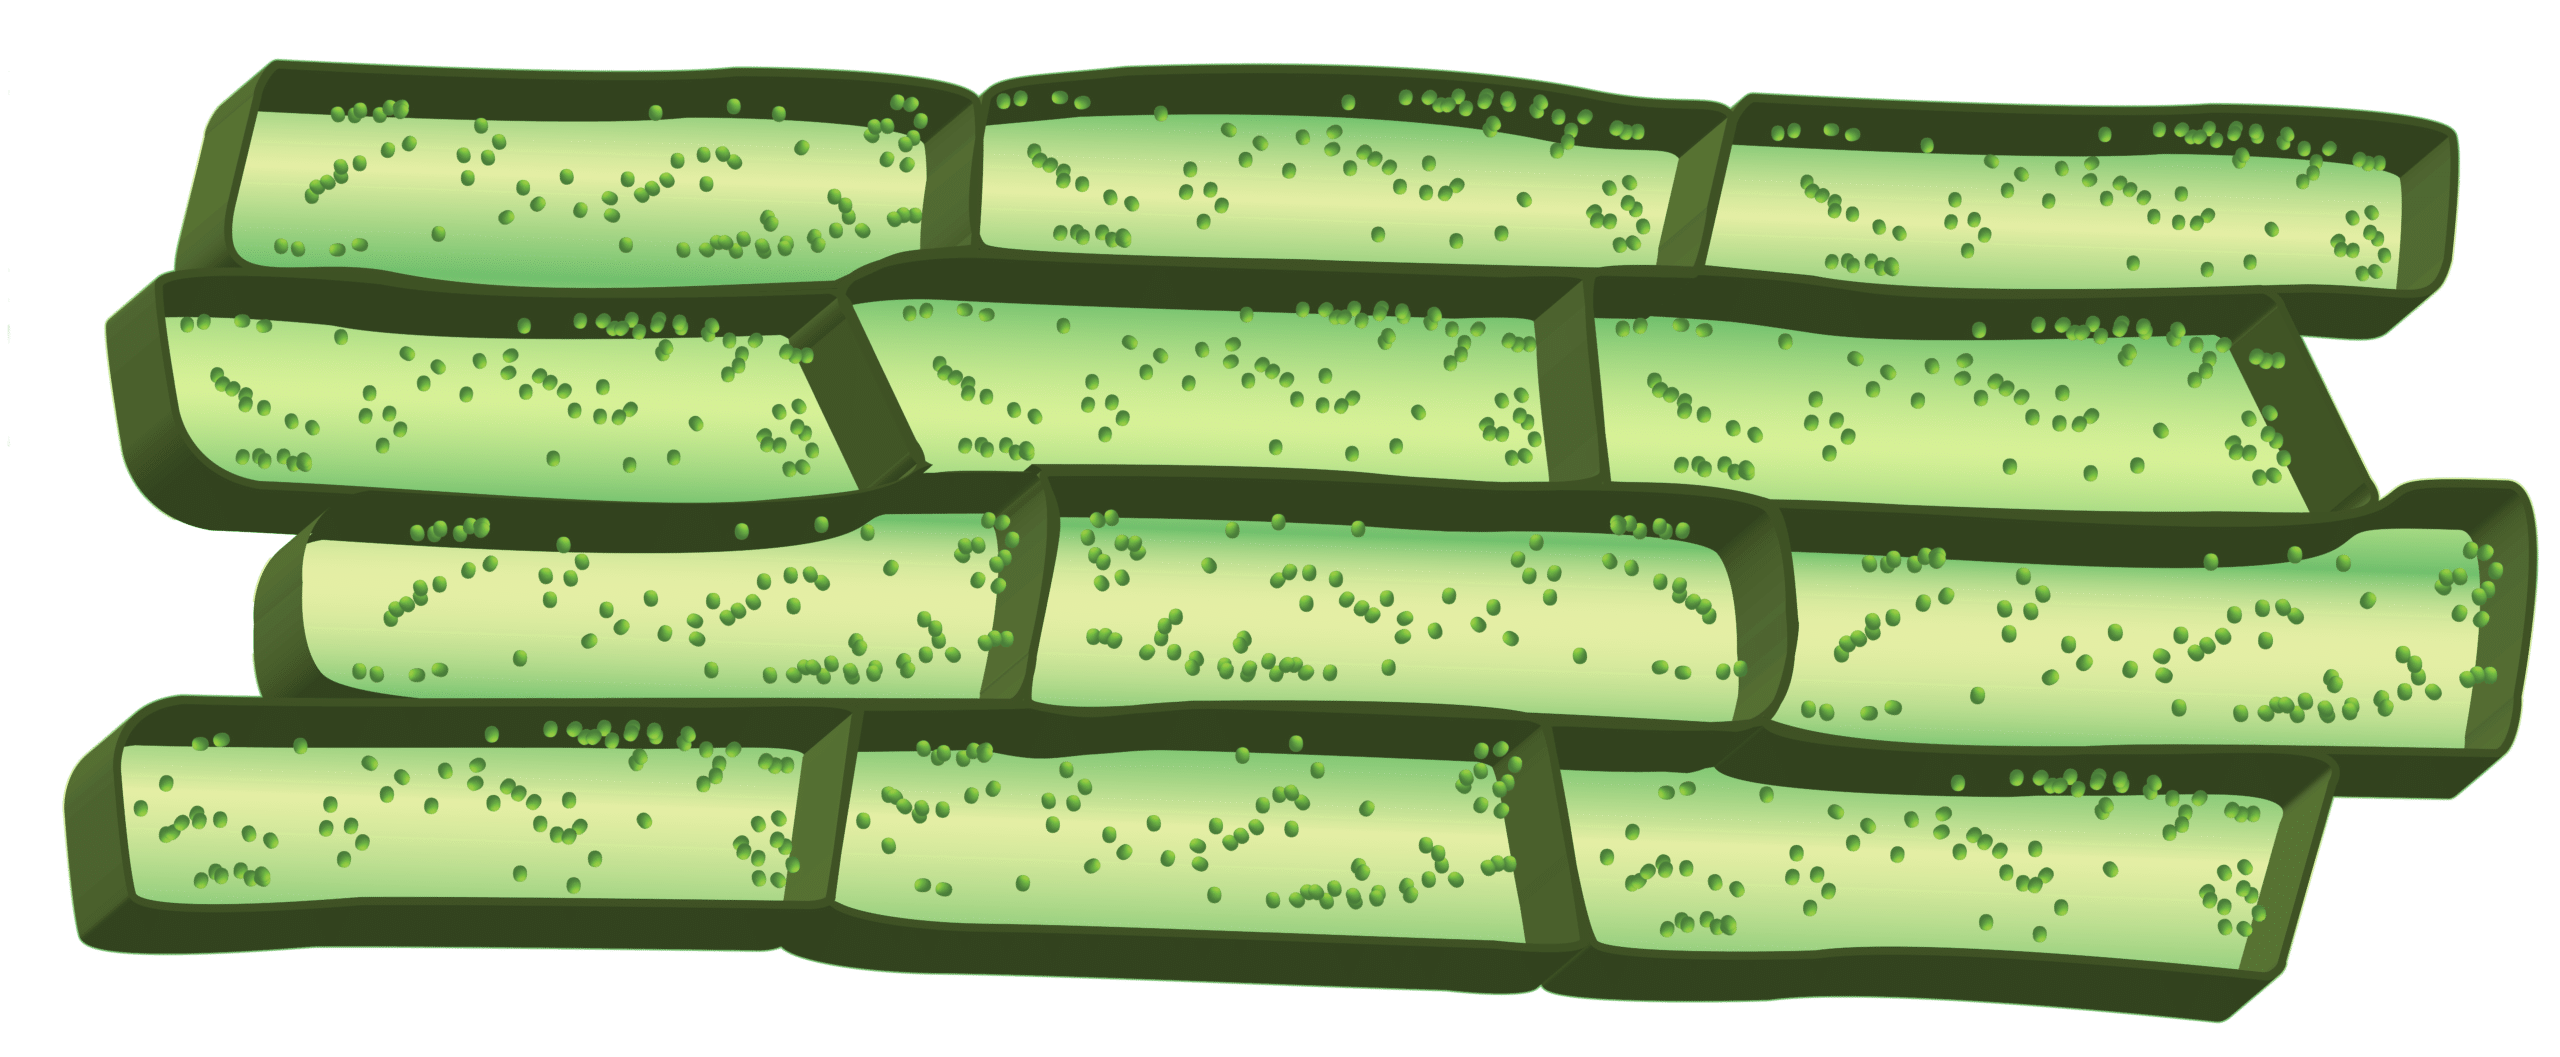 Cell biology illustration Plant cells with chloroplasts